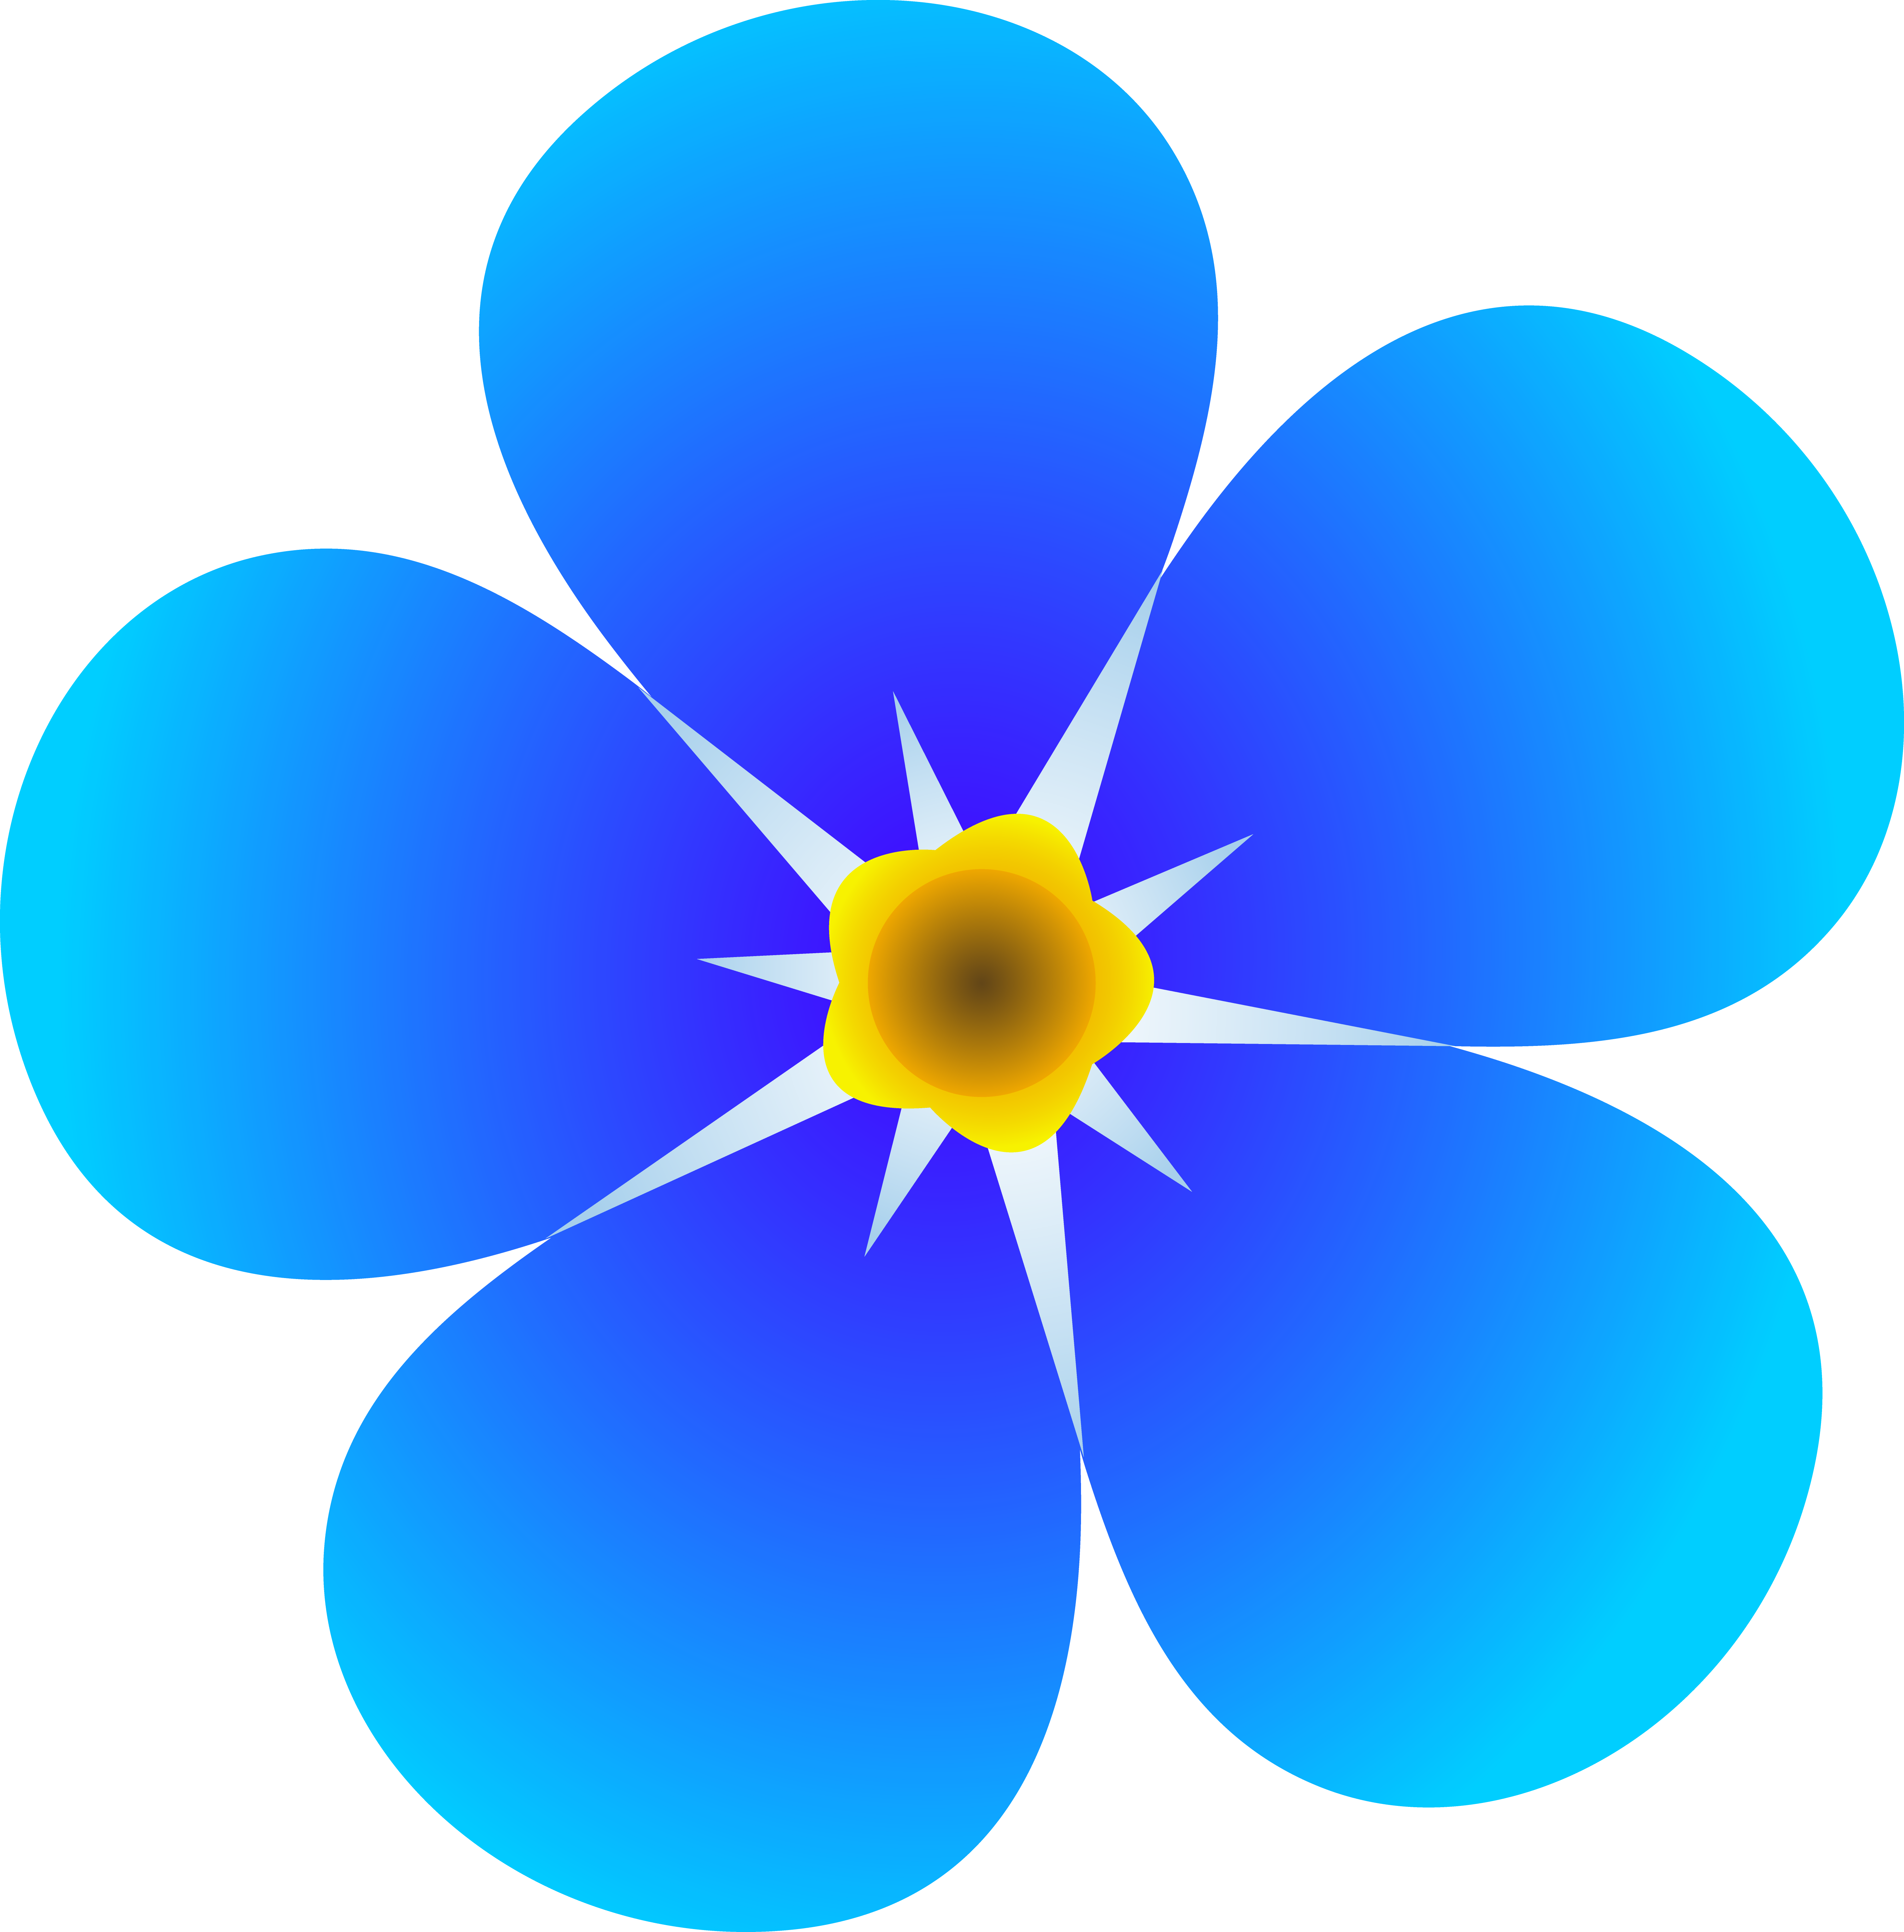 Single Forget Me Not Flower Free Clip Art | qidongtour.